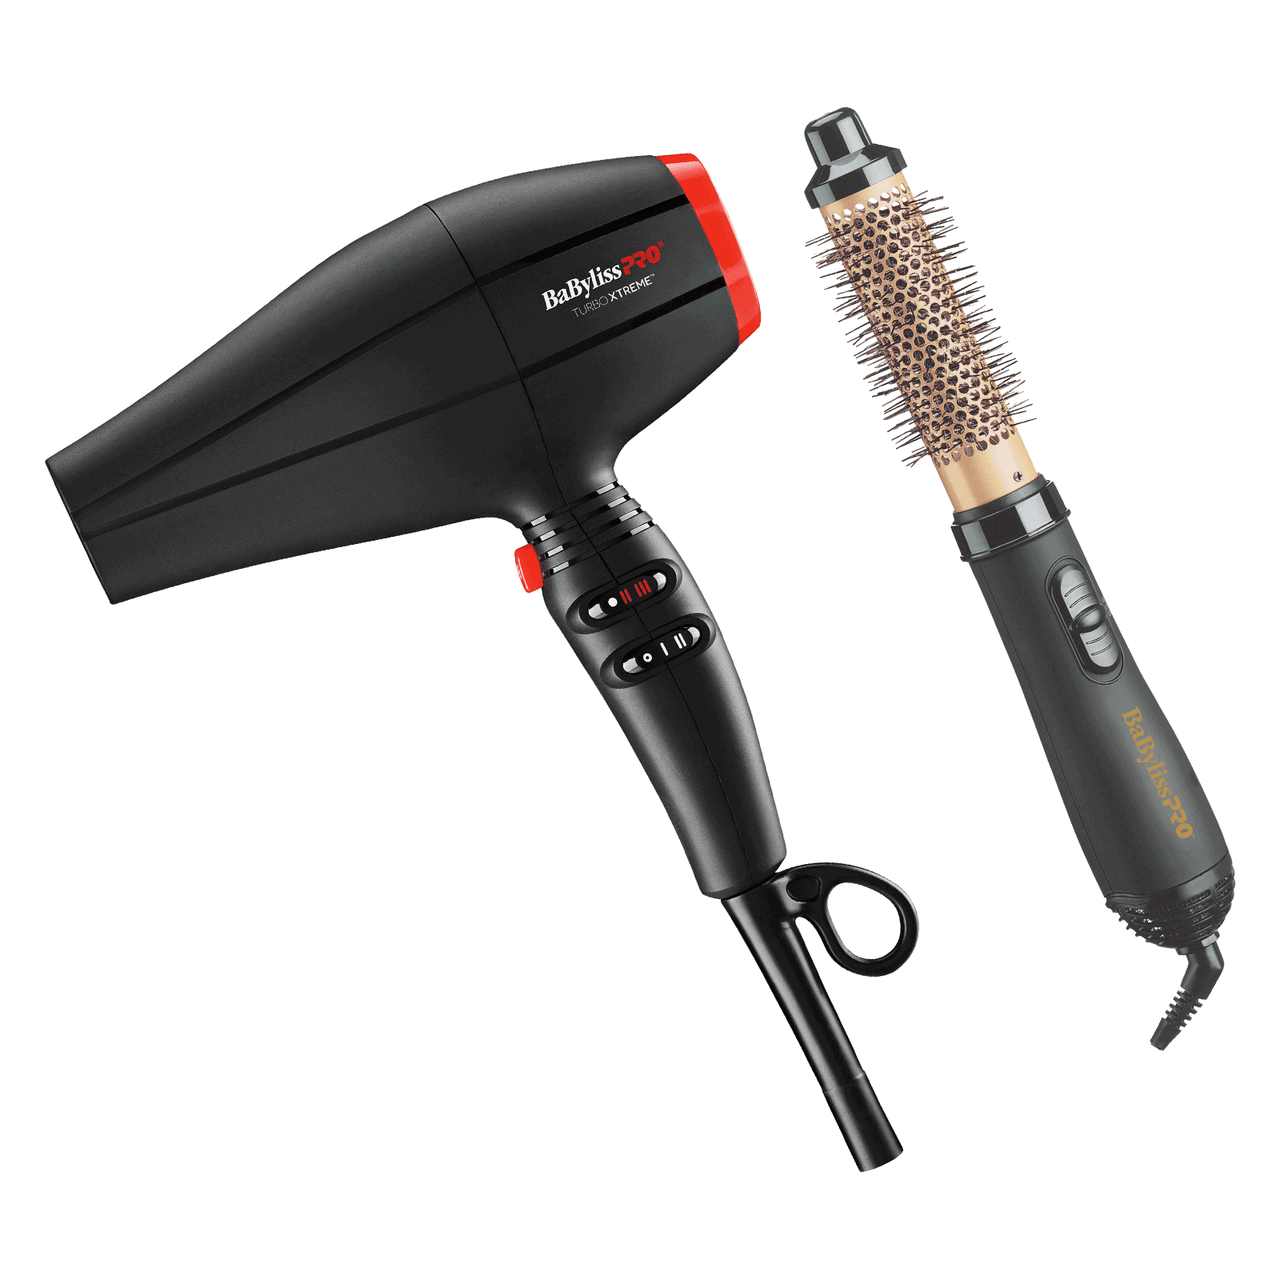 Dannyco Electrical Buy Turbo Xtreme Ionic Dryer + Get Ionic Hot Styler Free 